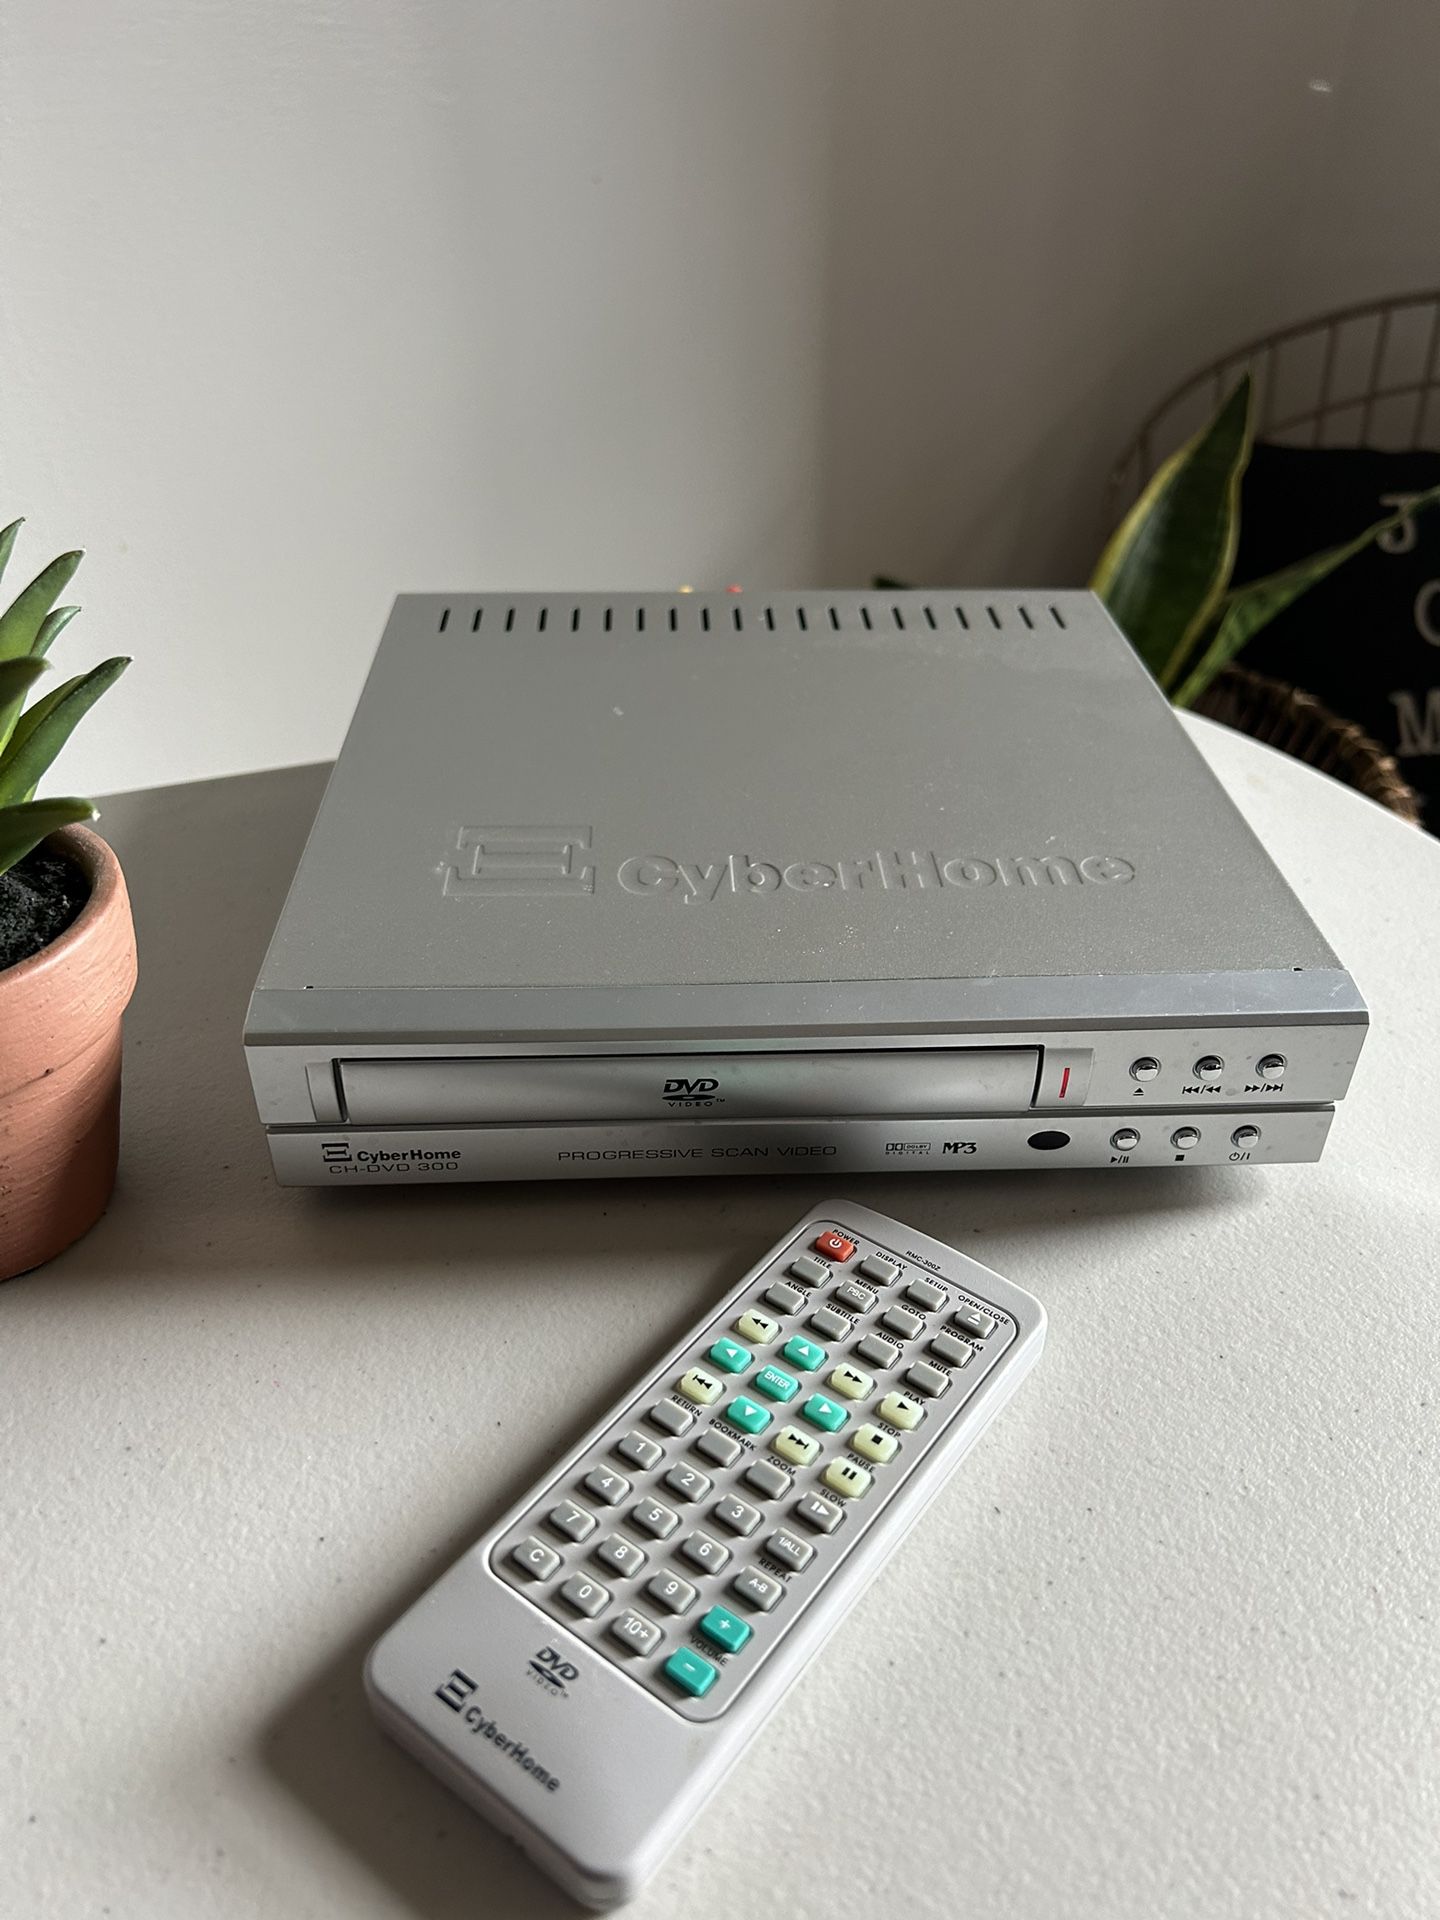 Cyberhome Dvd Player- Electronic -Works Great- Remote/cords come with